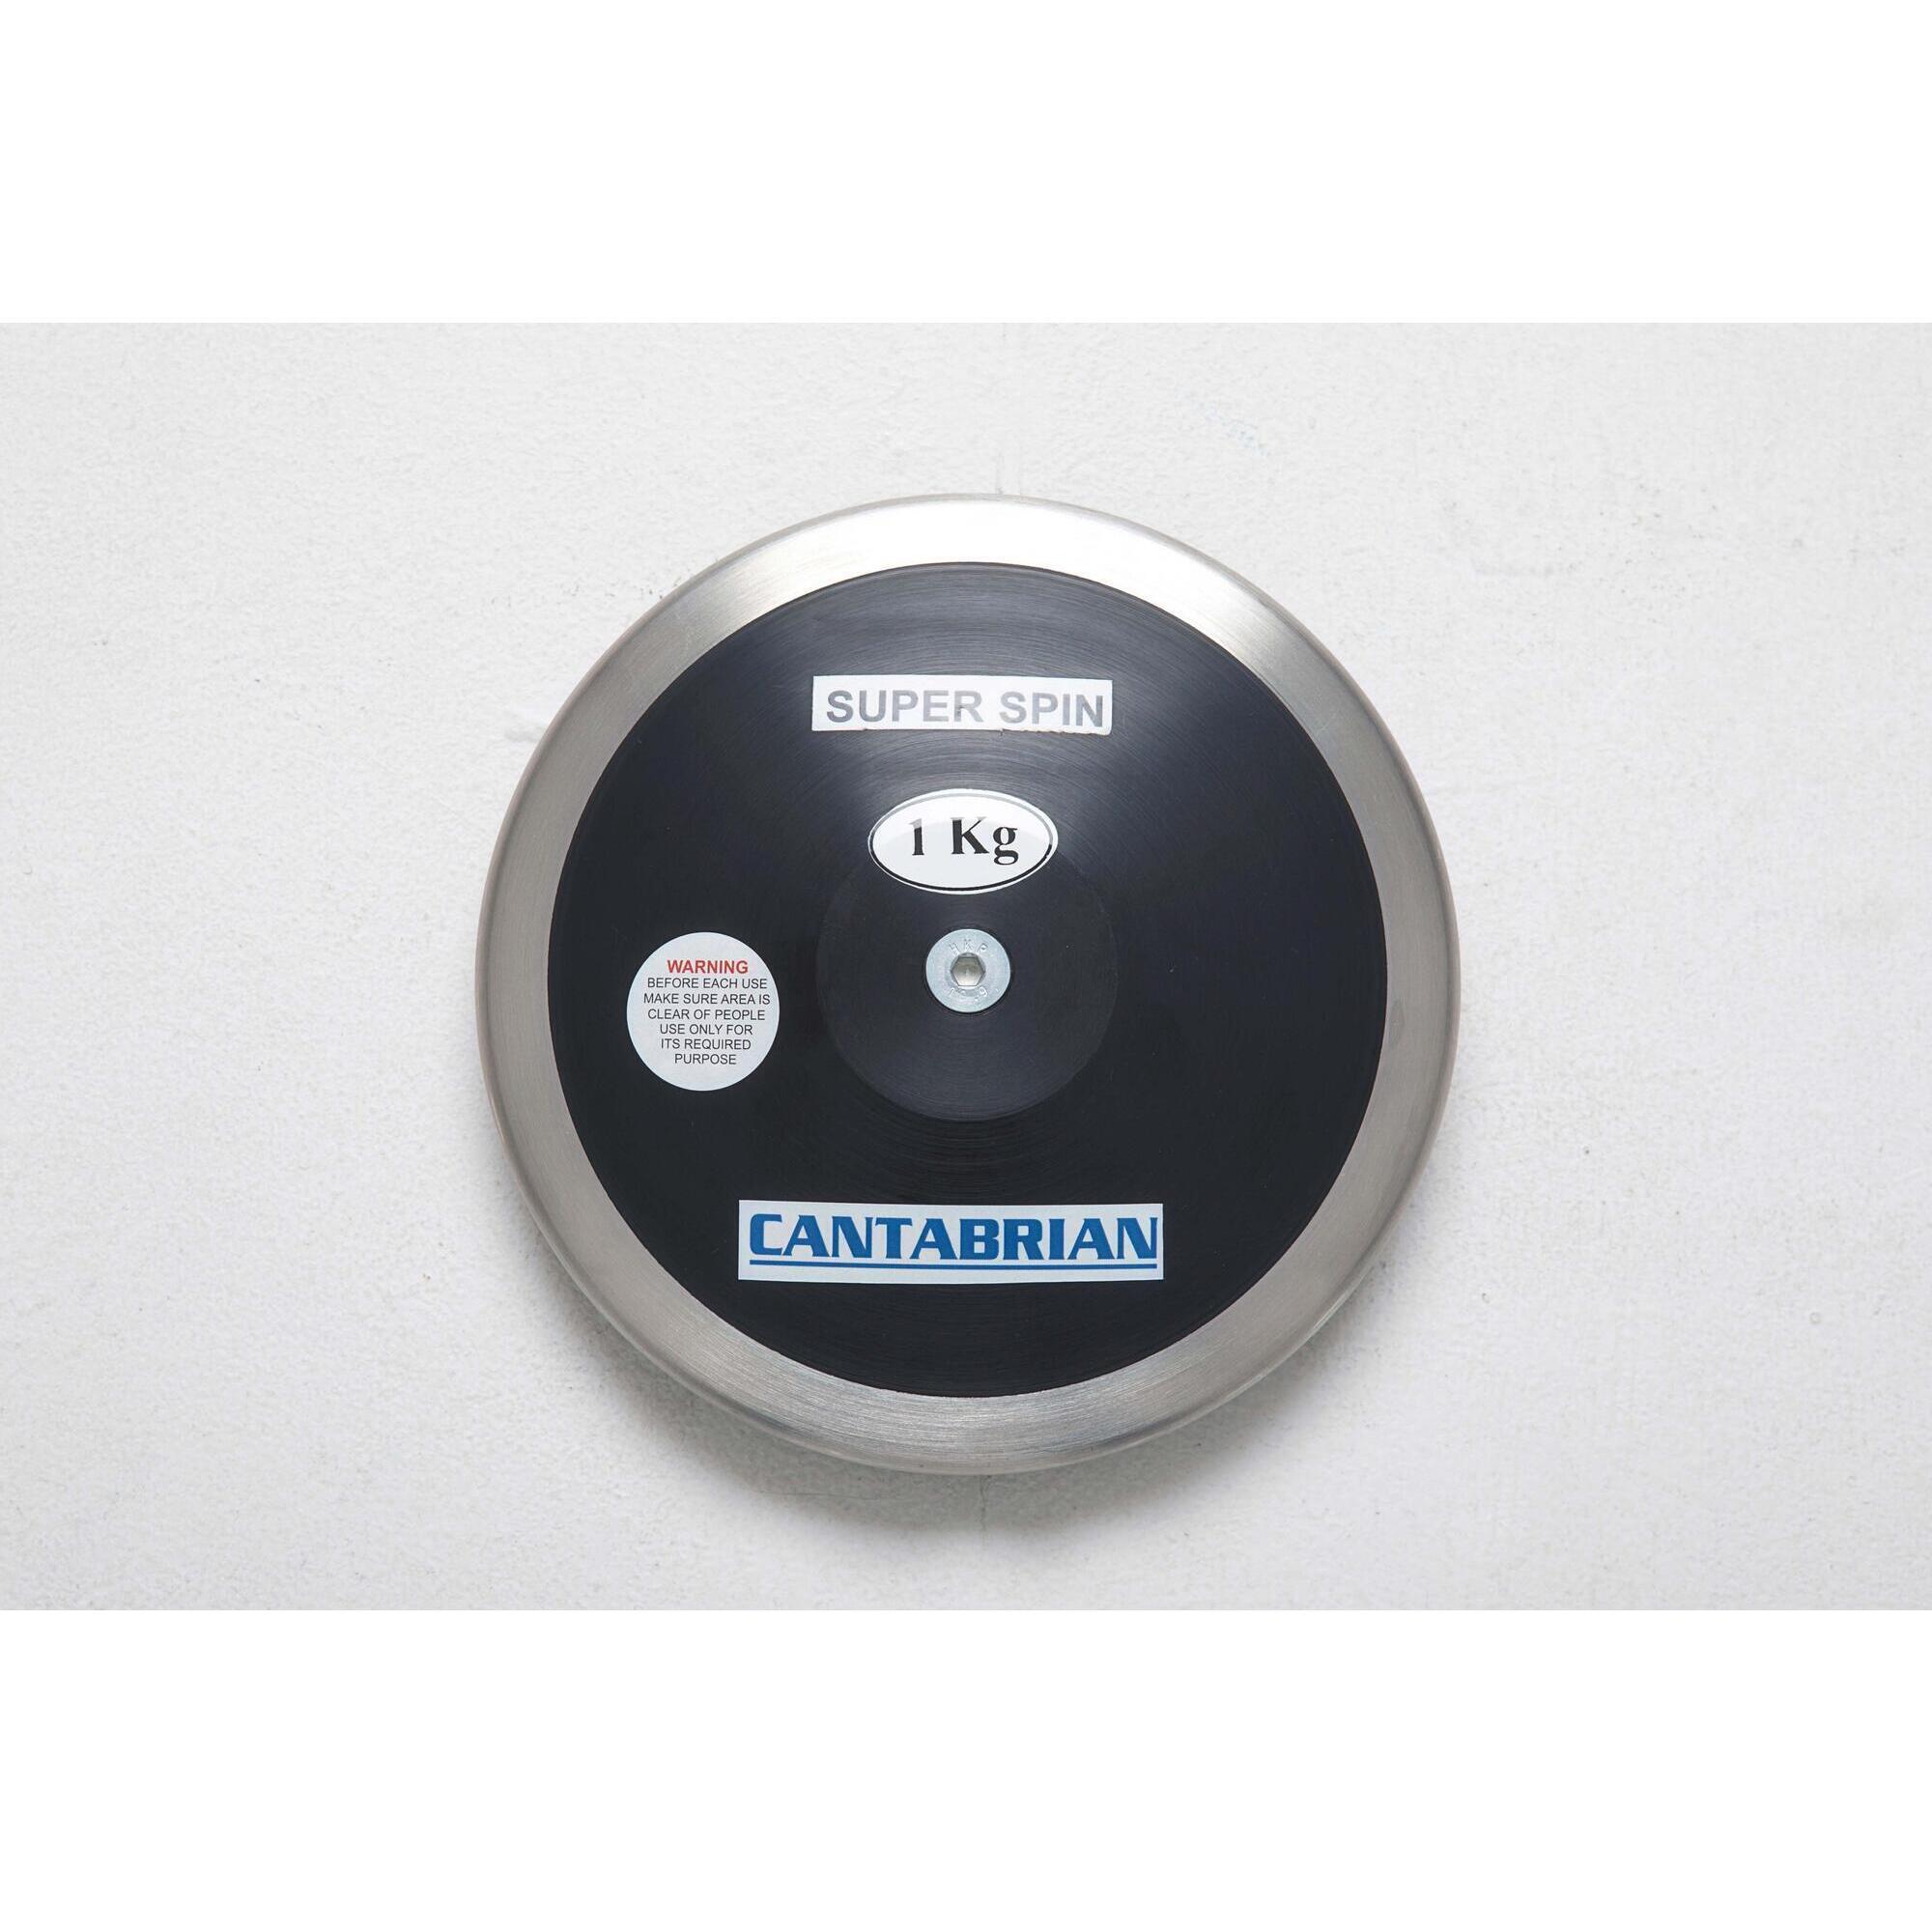 CANTABRIAN Cantabrian Super Spin Competition Discus